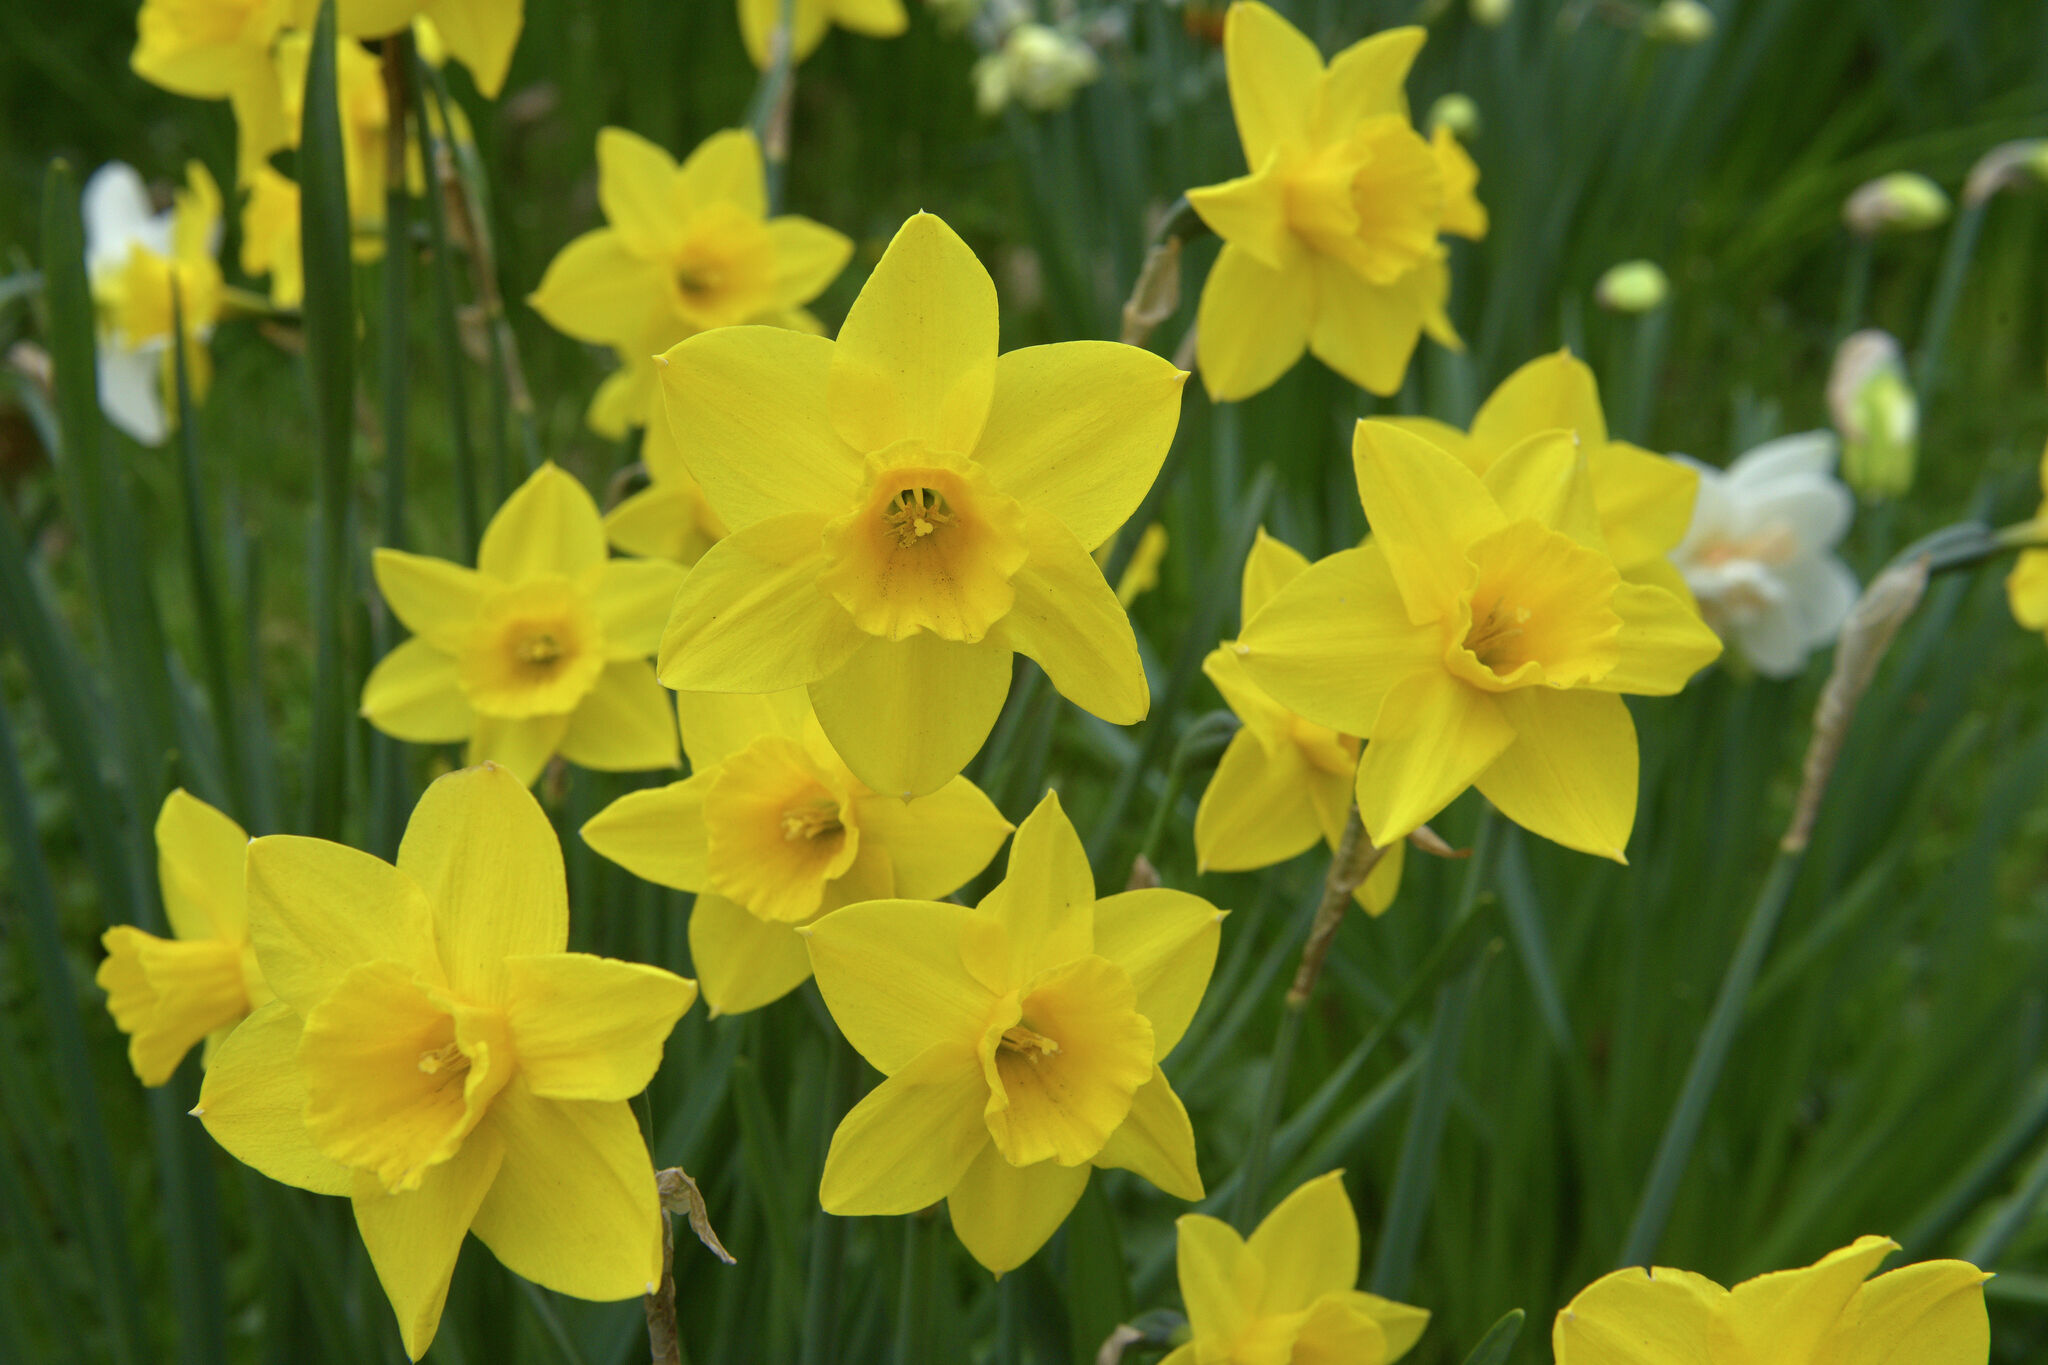 Photos: Wilton is in bloom with daffodils, thanks to garden club